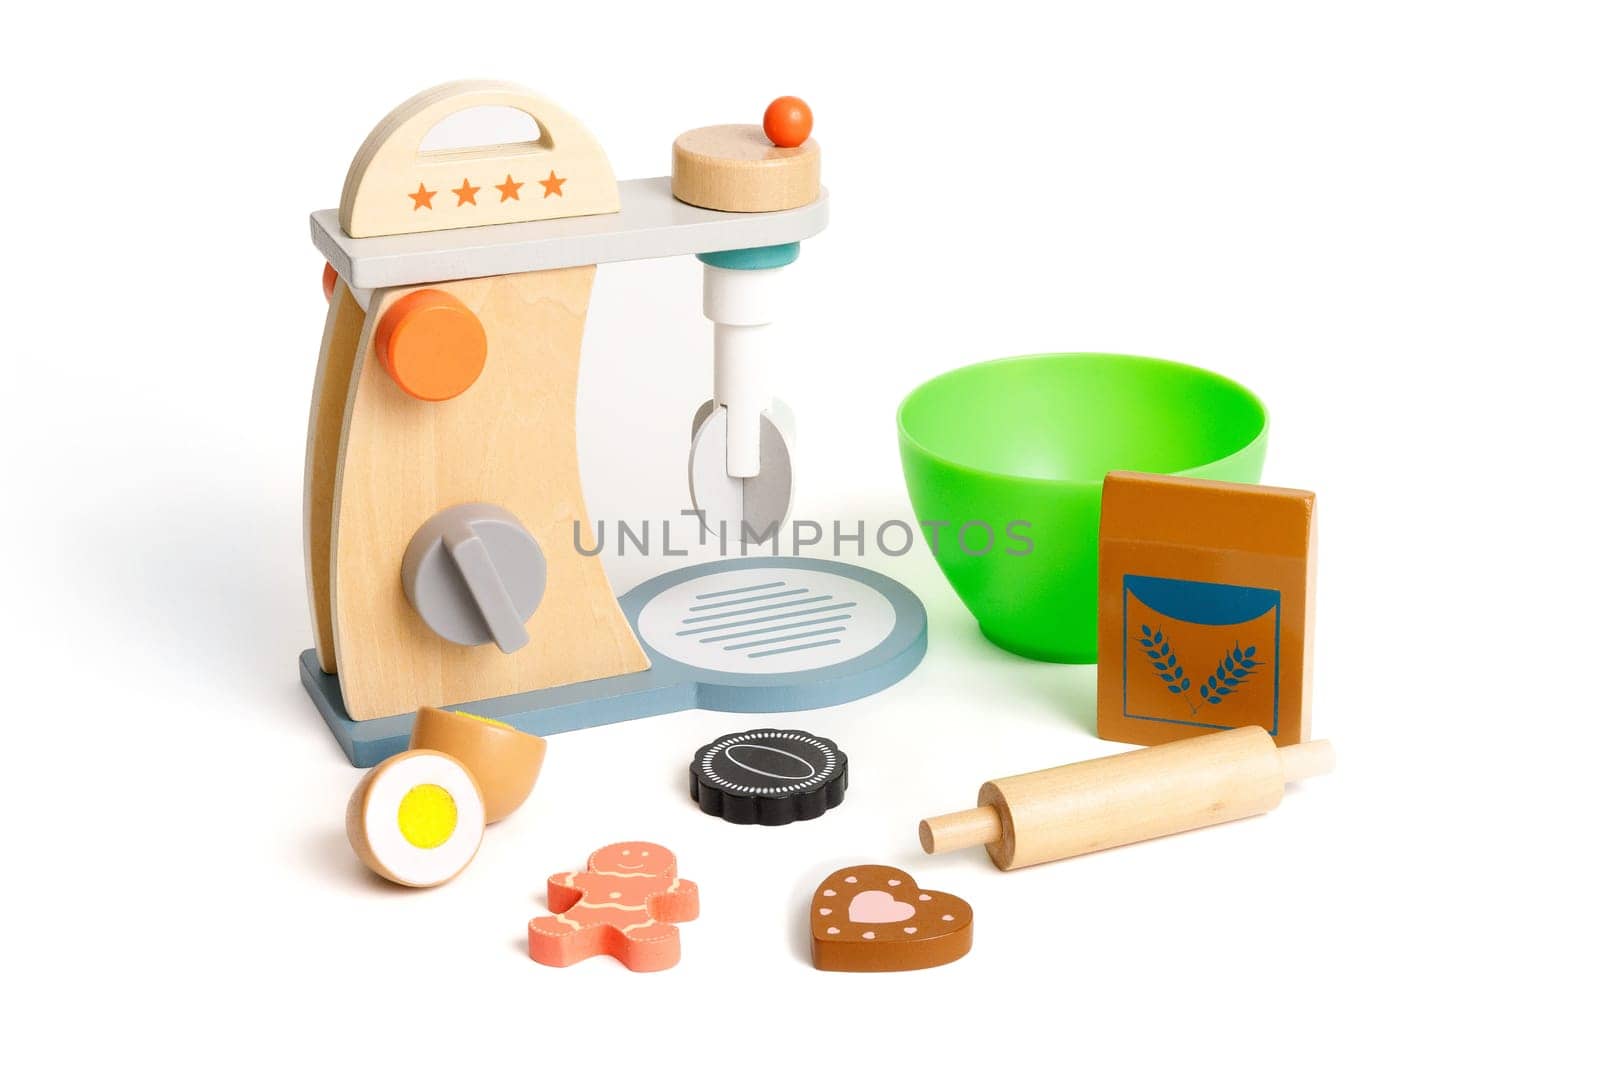 Toy kitchen plastic set for baking cookies, isolated on white background.